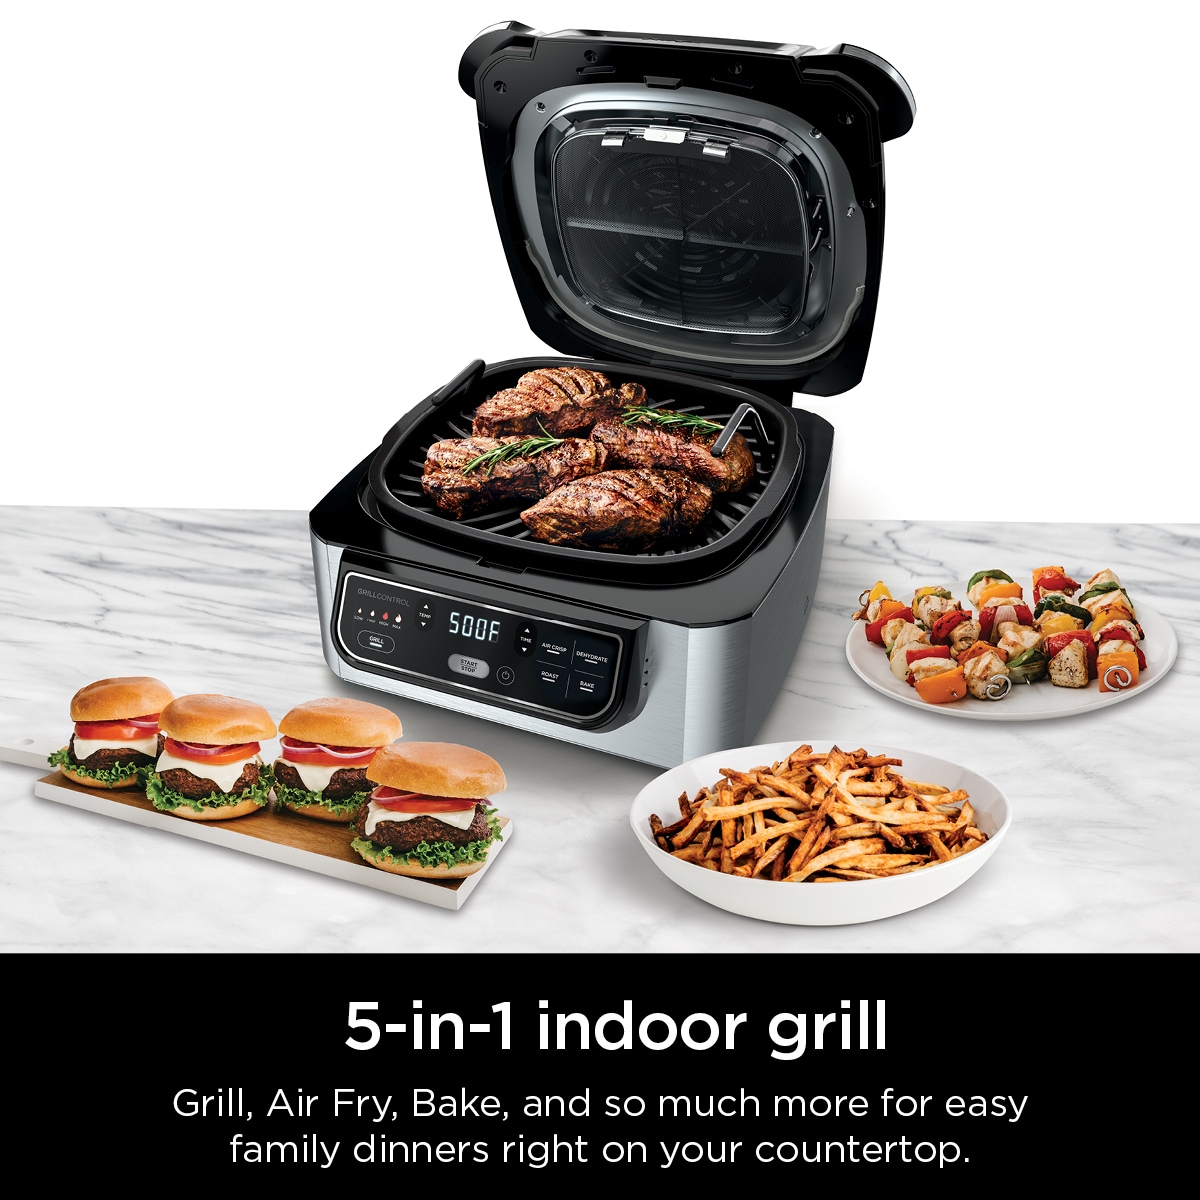 Which Ninja Foodi Indoor Grill is Right For You? 